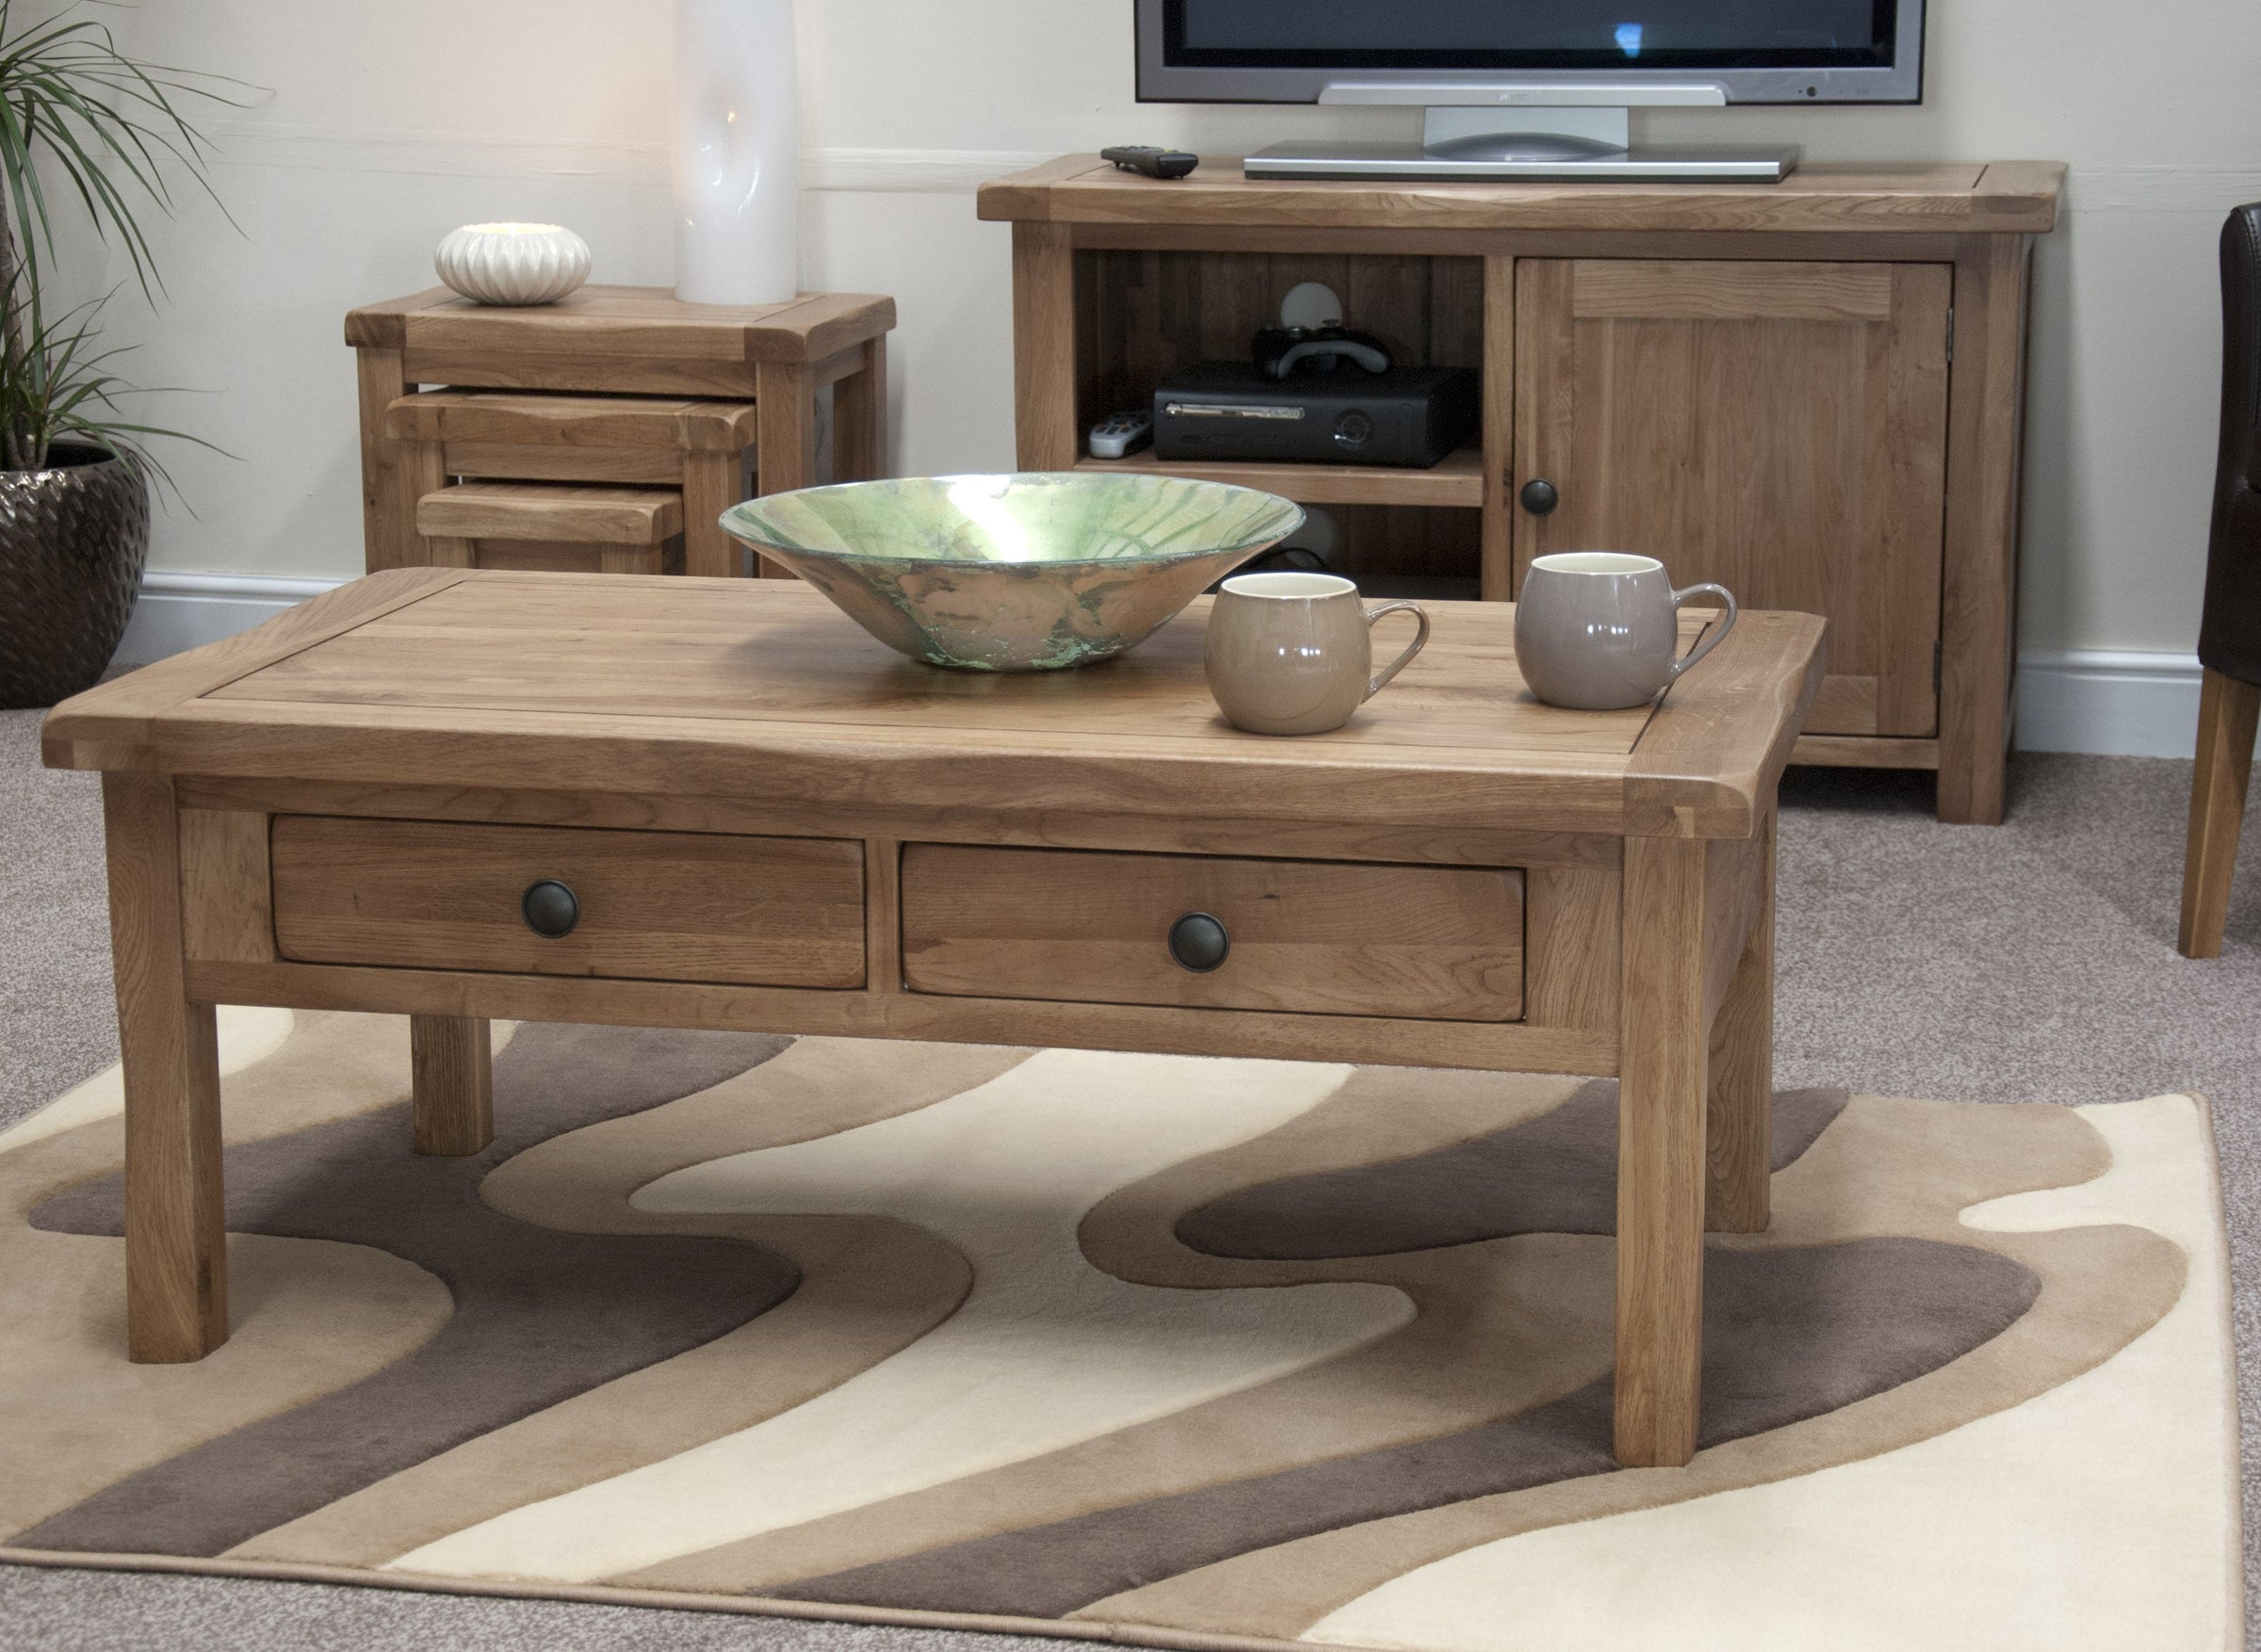 Rustic Solid Oak Furniture from Top Secret Furniture Outlet, Holmes Chapel, Cheshire